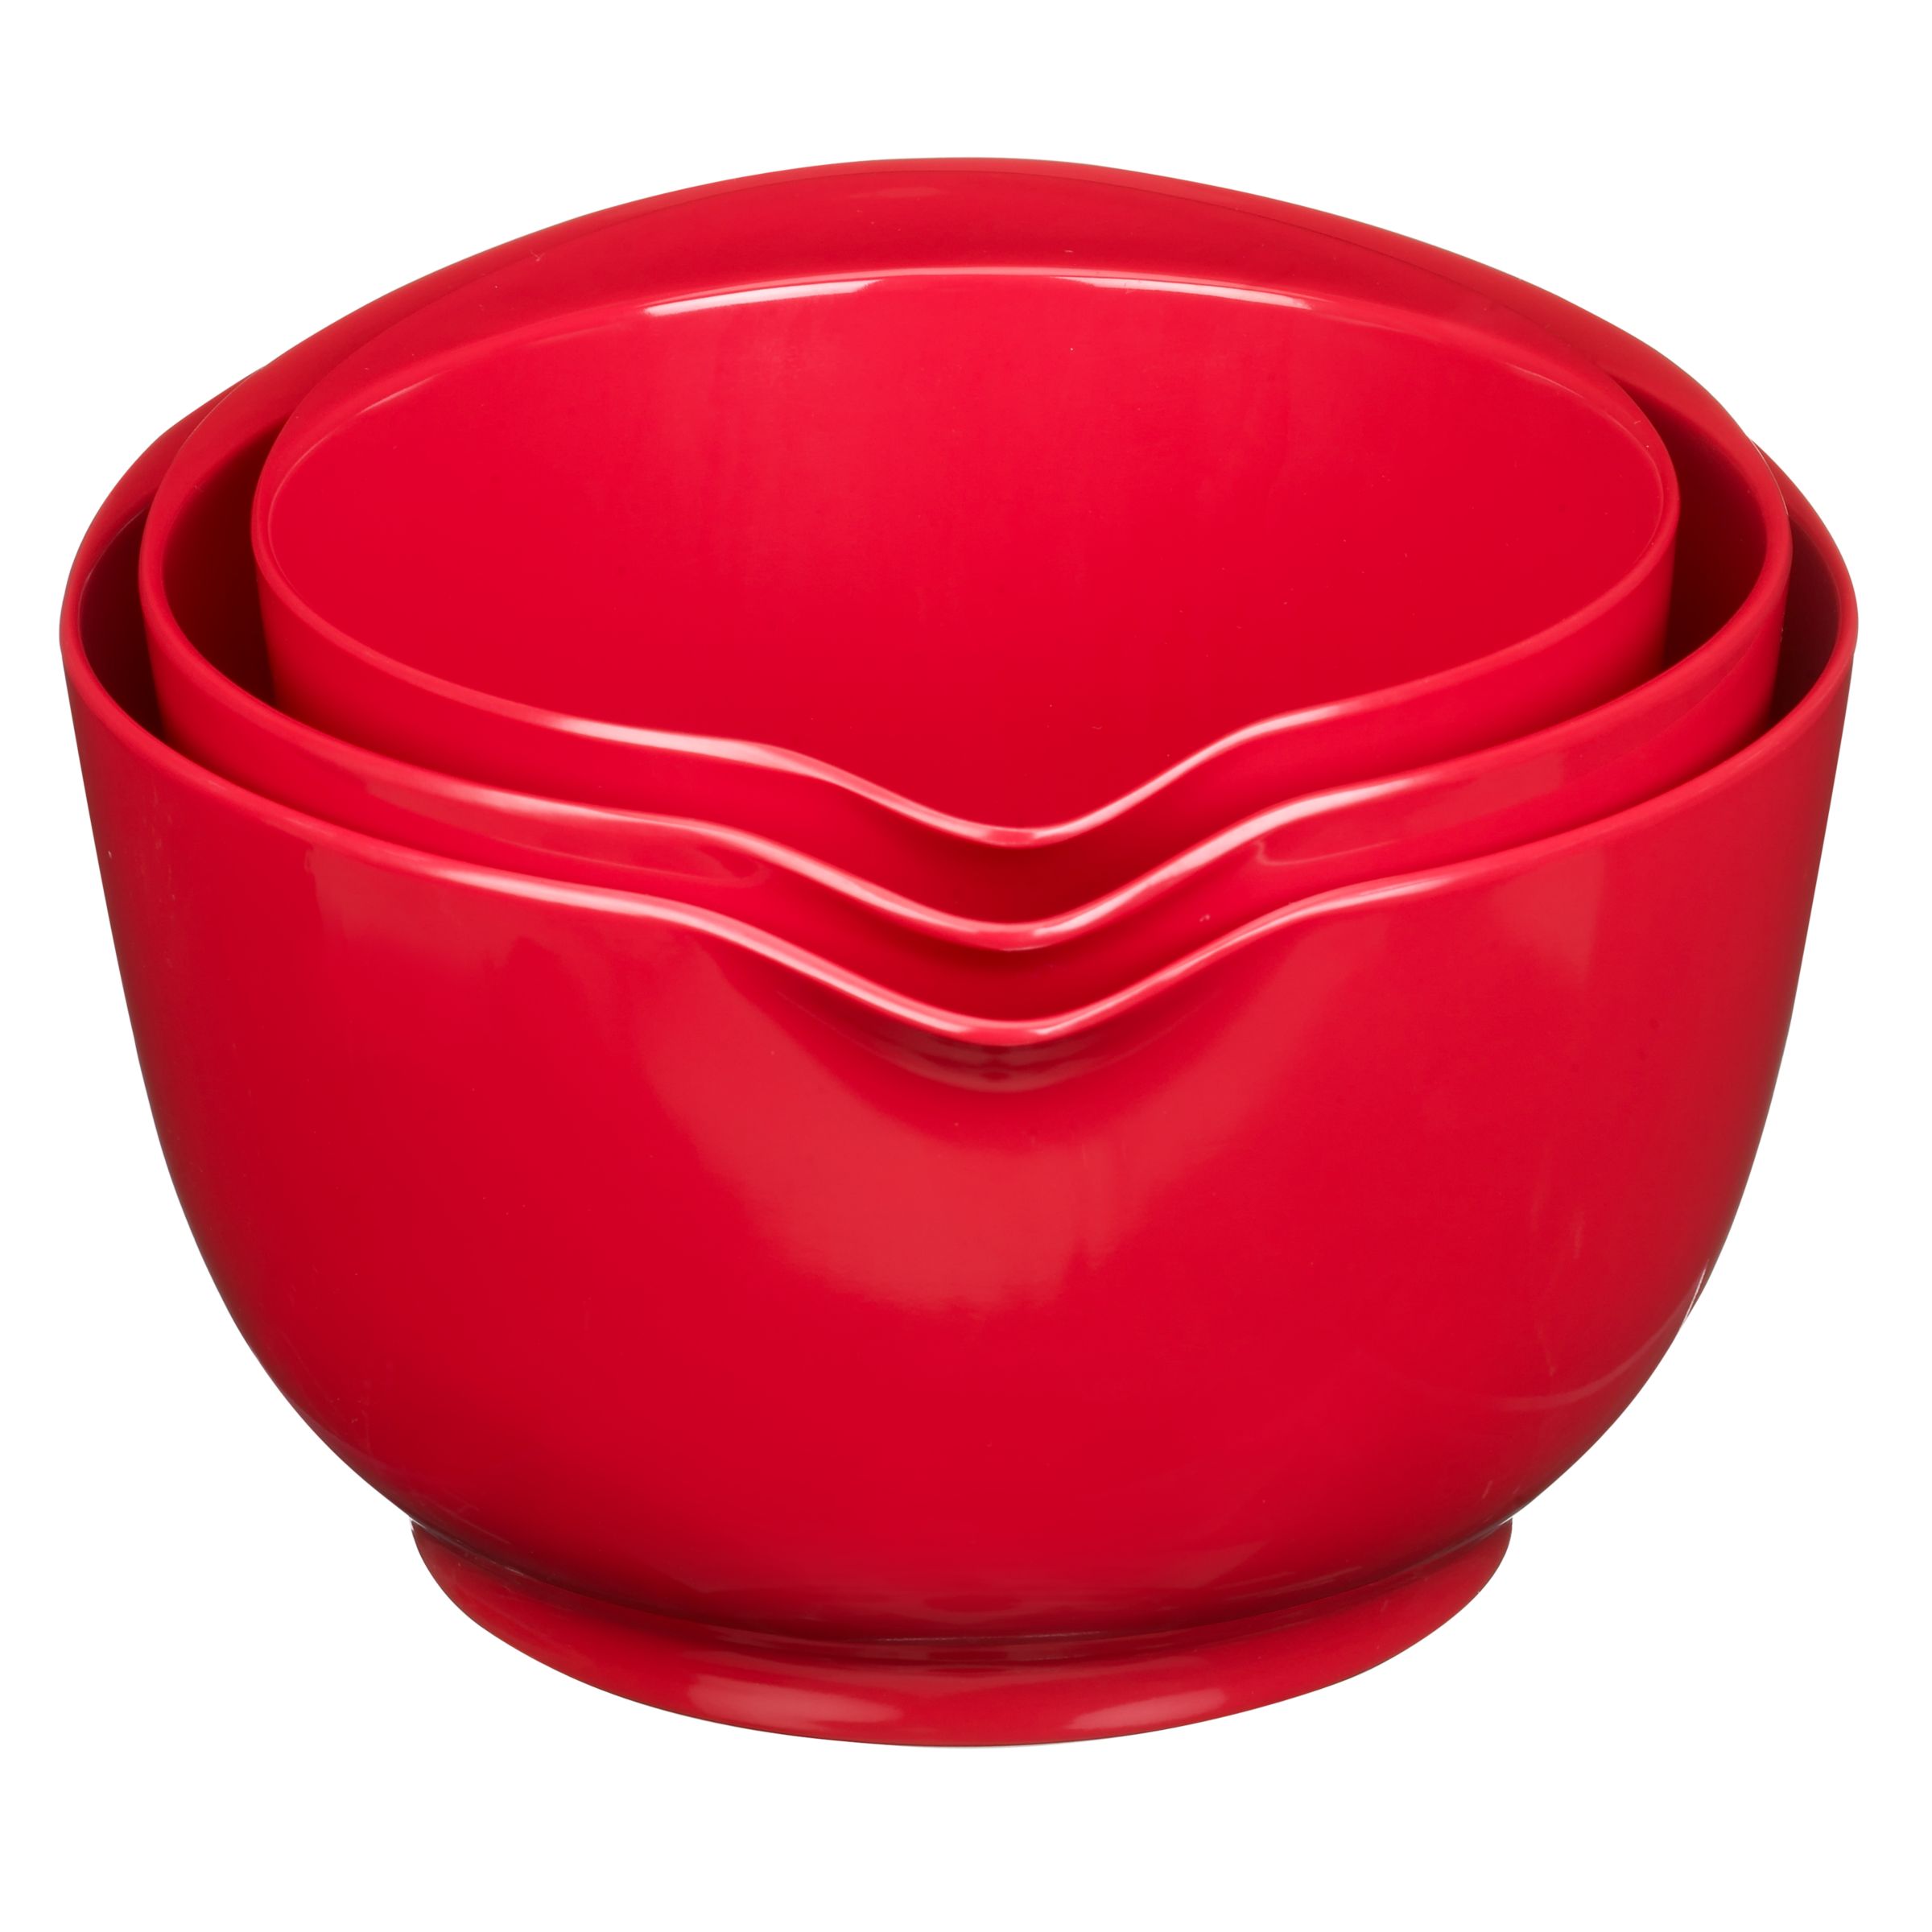 Melamine Mixing Bowls, Red, Set of 3